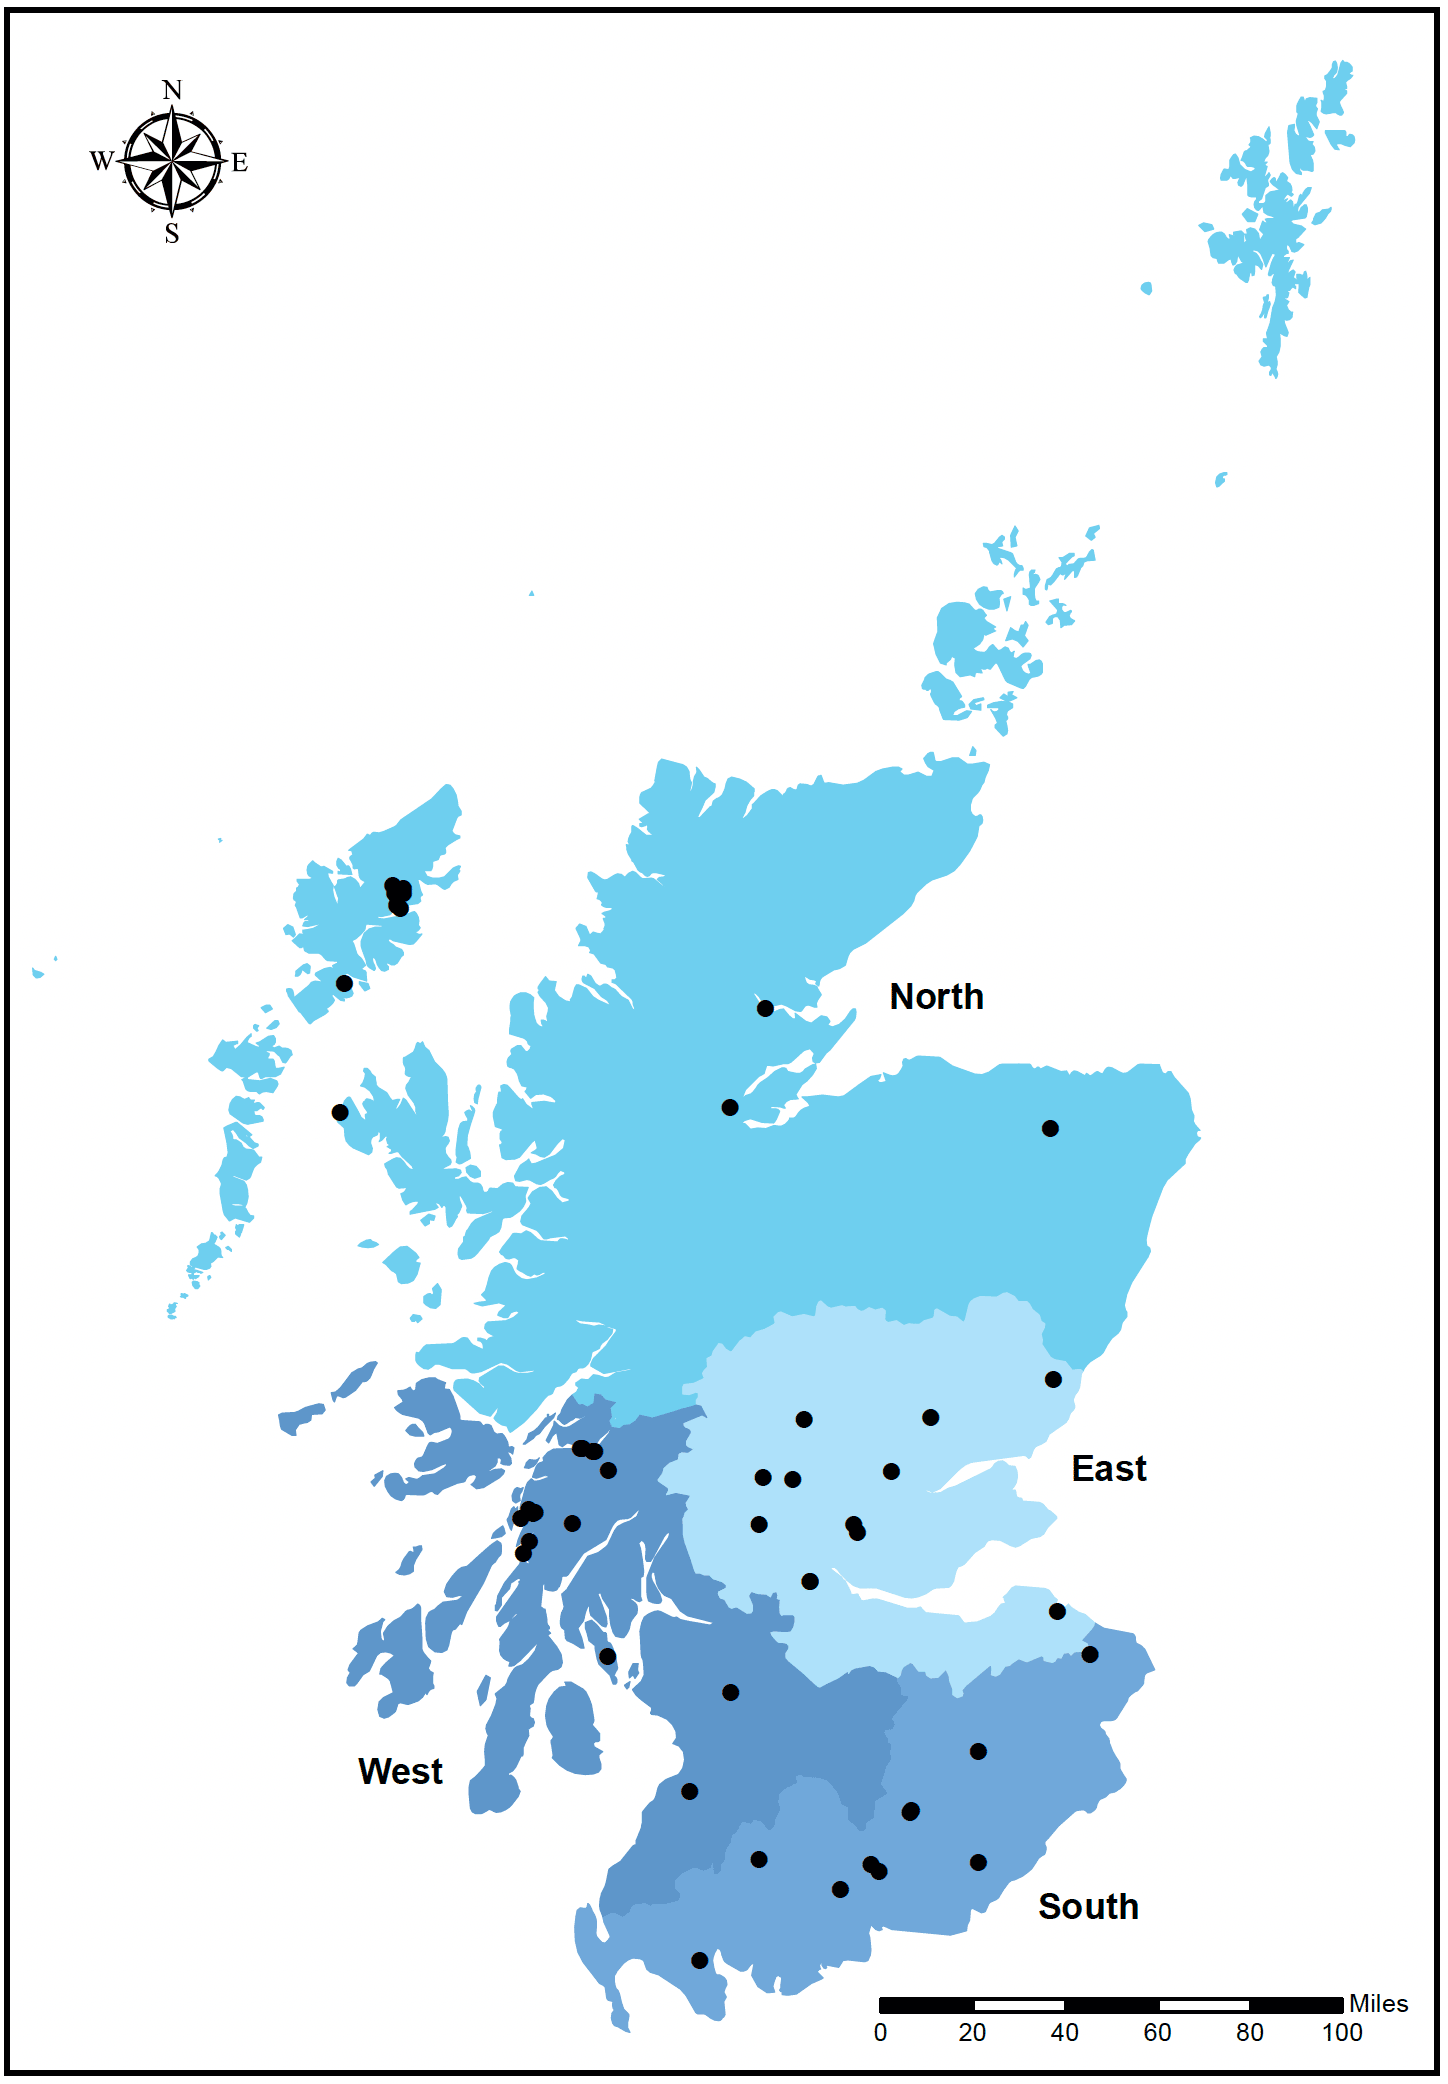 This is a map showing the distribution of active rainbow trout sites in Scotland in 2020. The map is split into 4 areas: North, East, West and South and has black dots showing where each site is on the map.